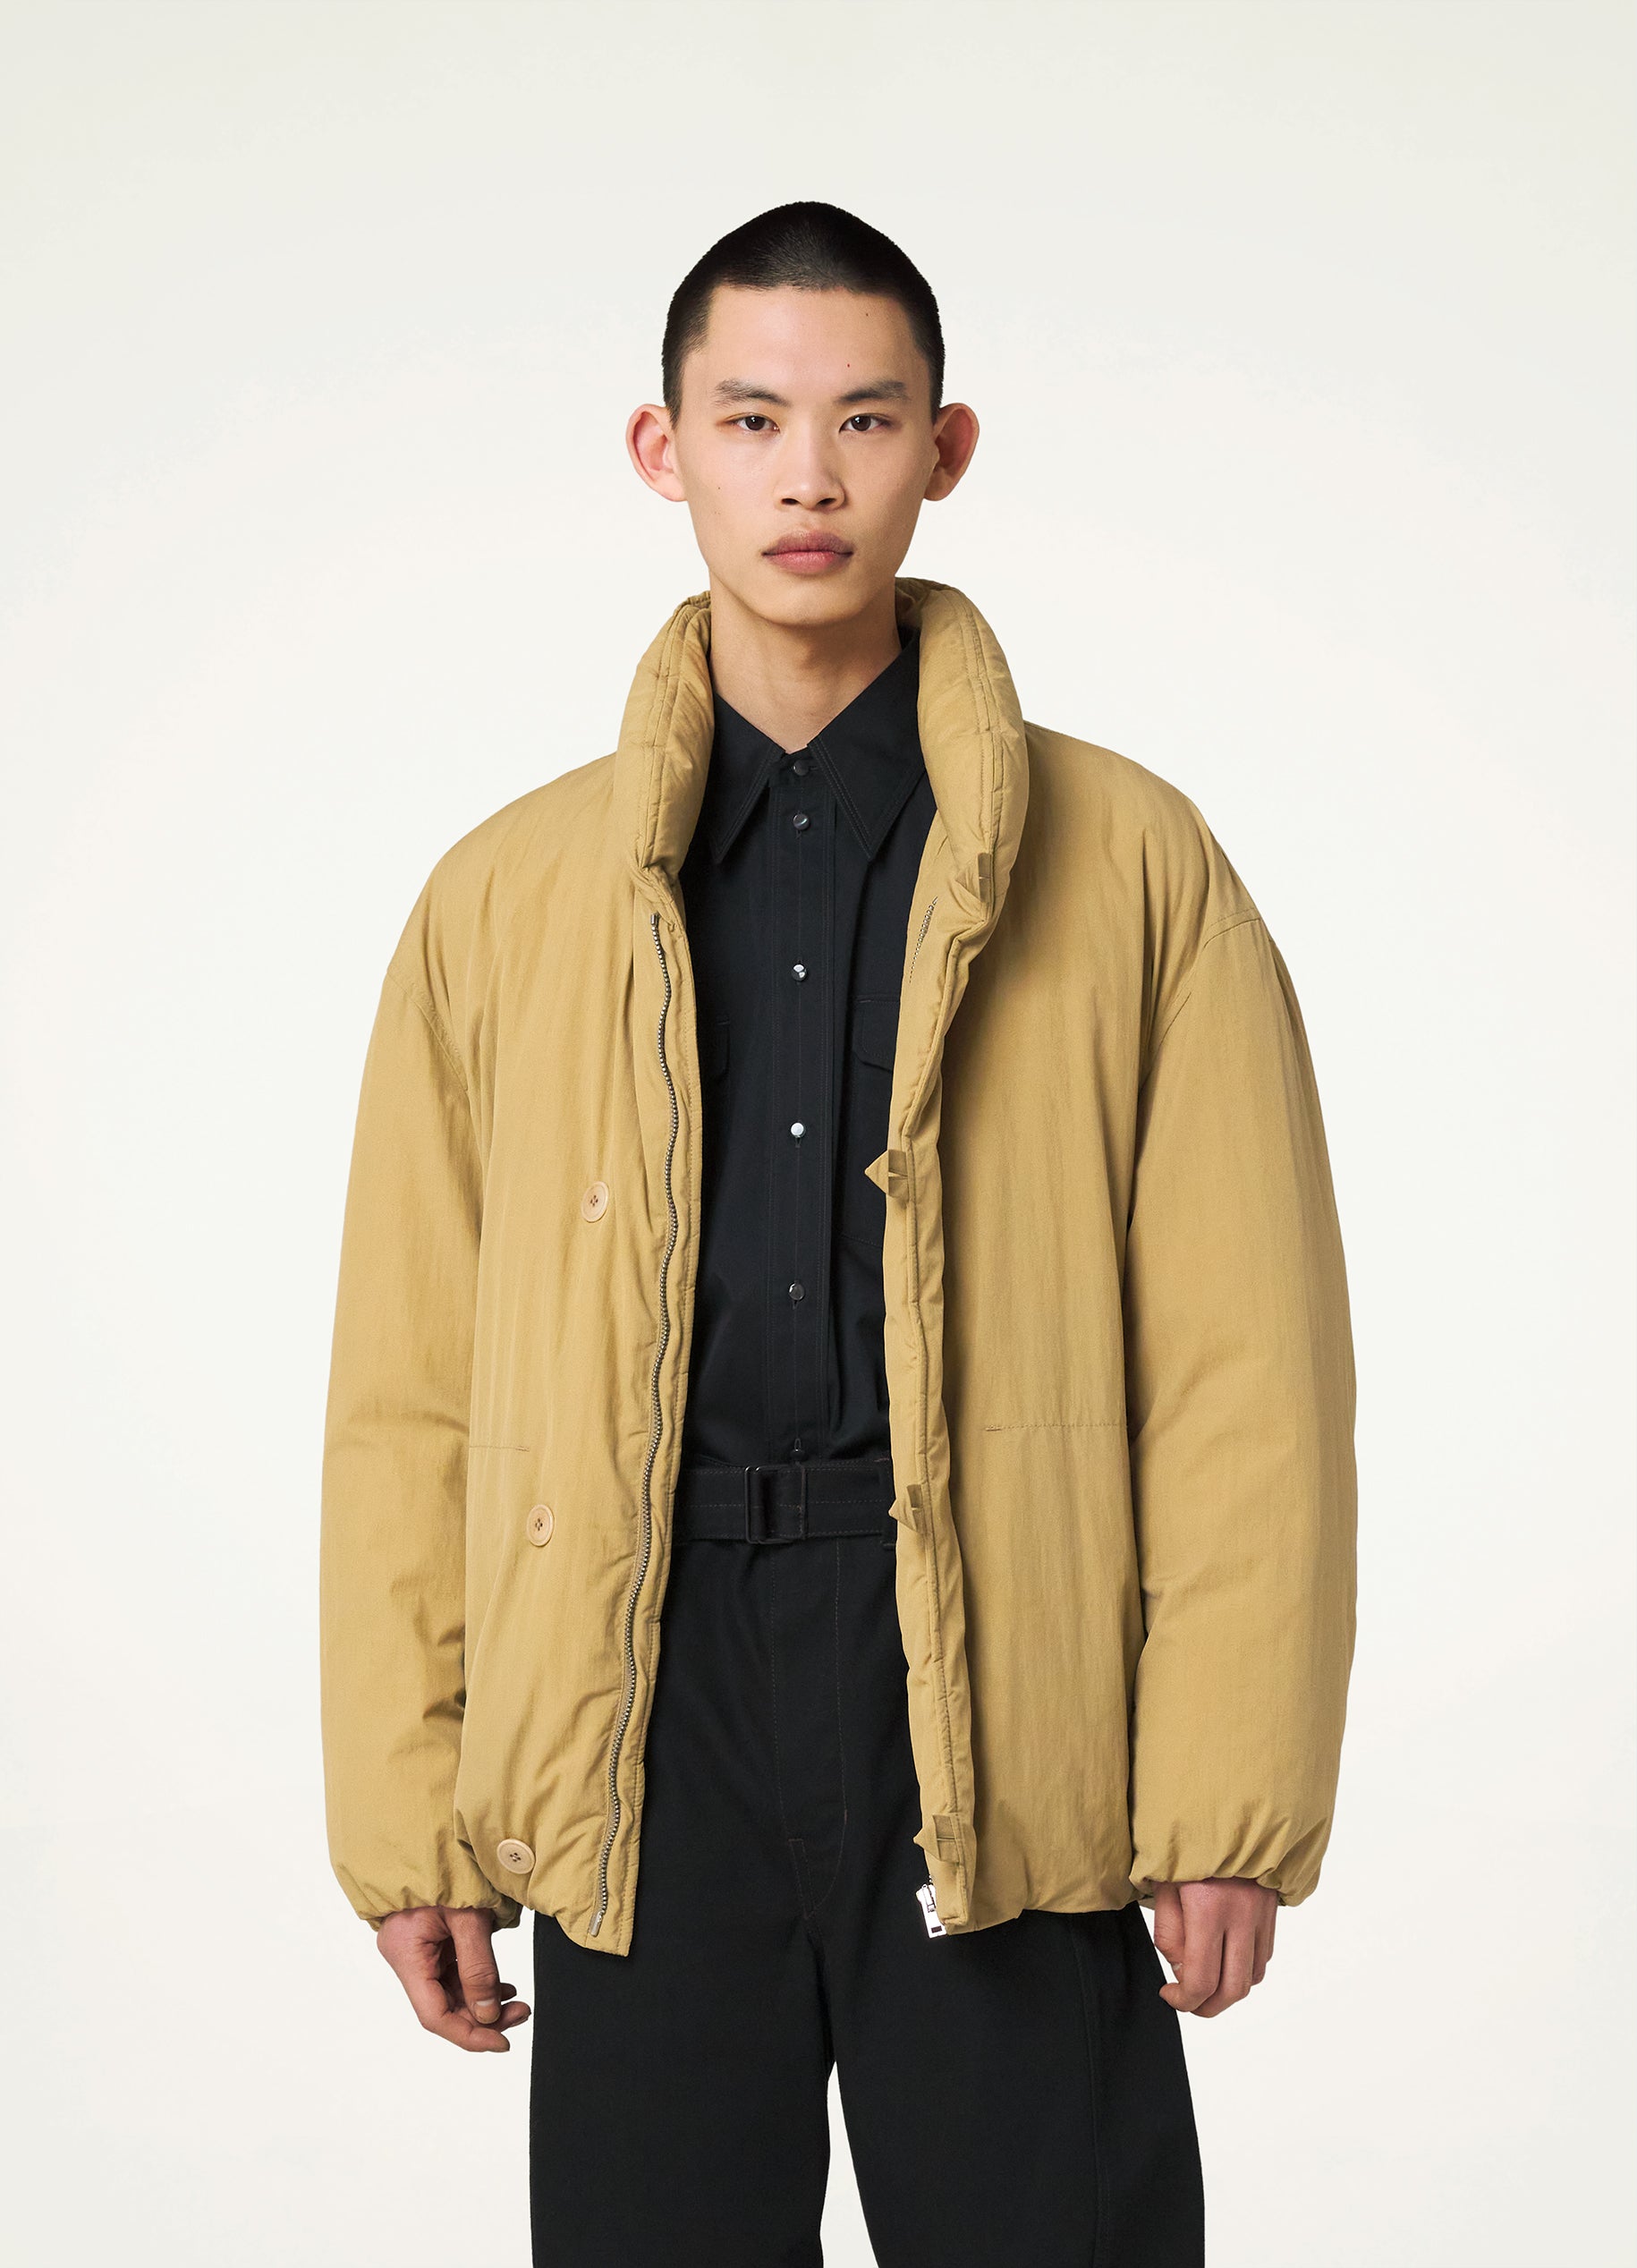 Water-Repellent Down Jacket in Ochre Khaki color - LEMAIRE